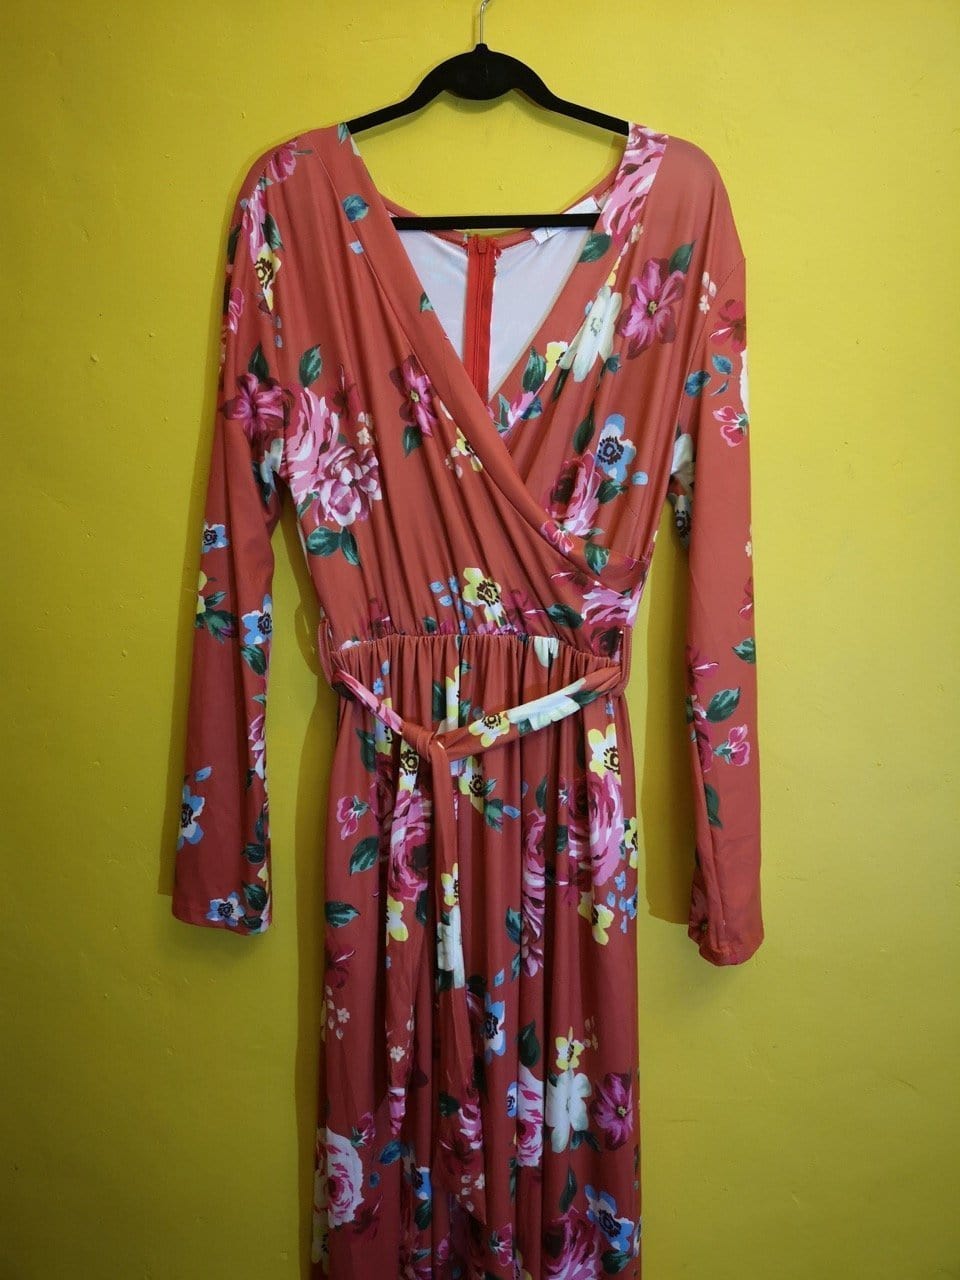 Flower dress with pockets